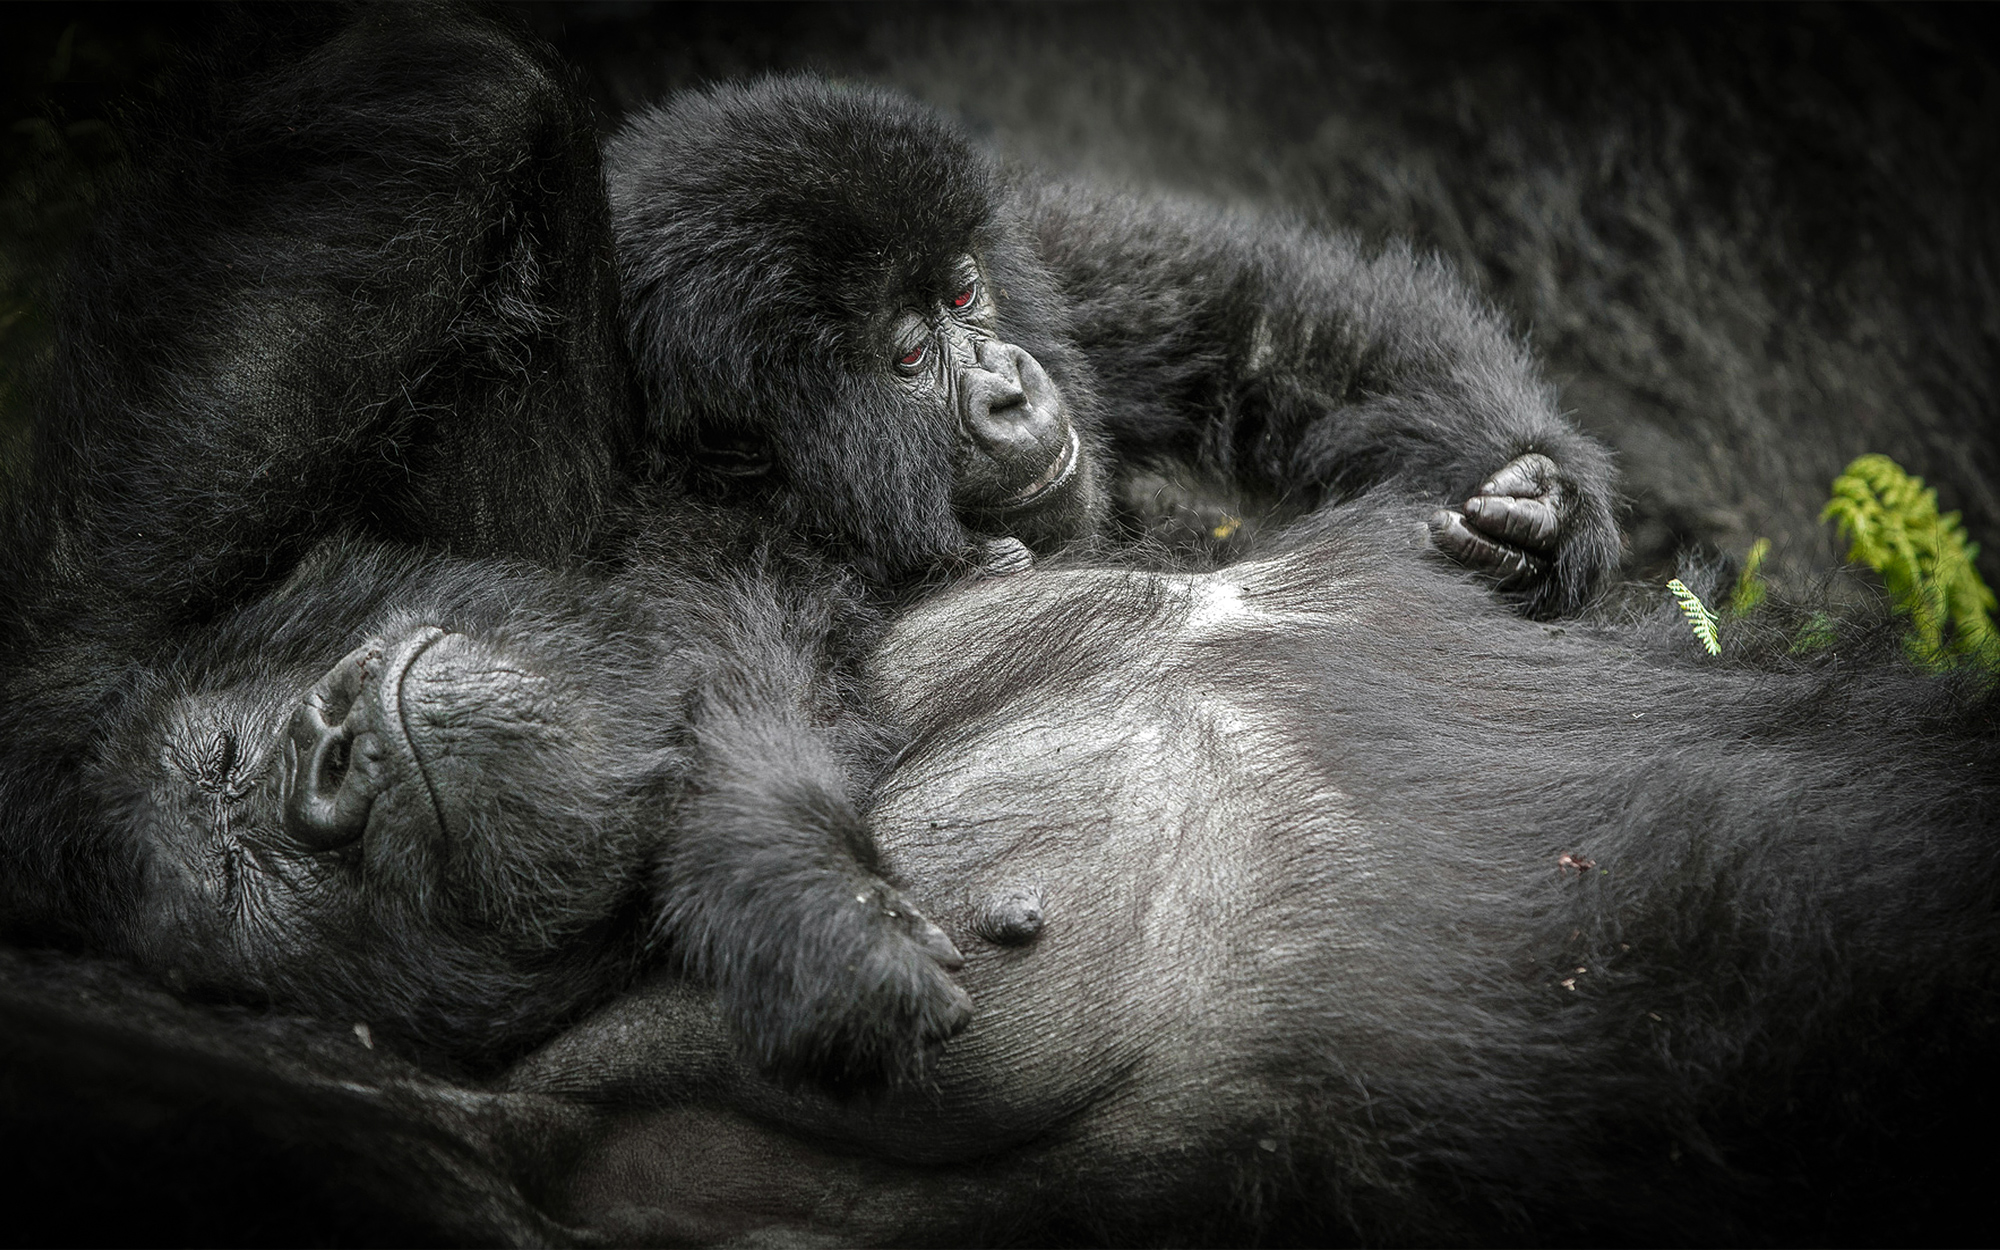 A mother and baby mountain gorilla rest in Volcanoes National Park